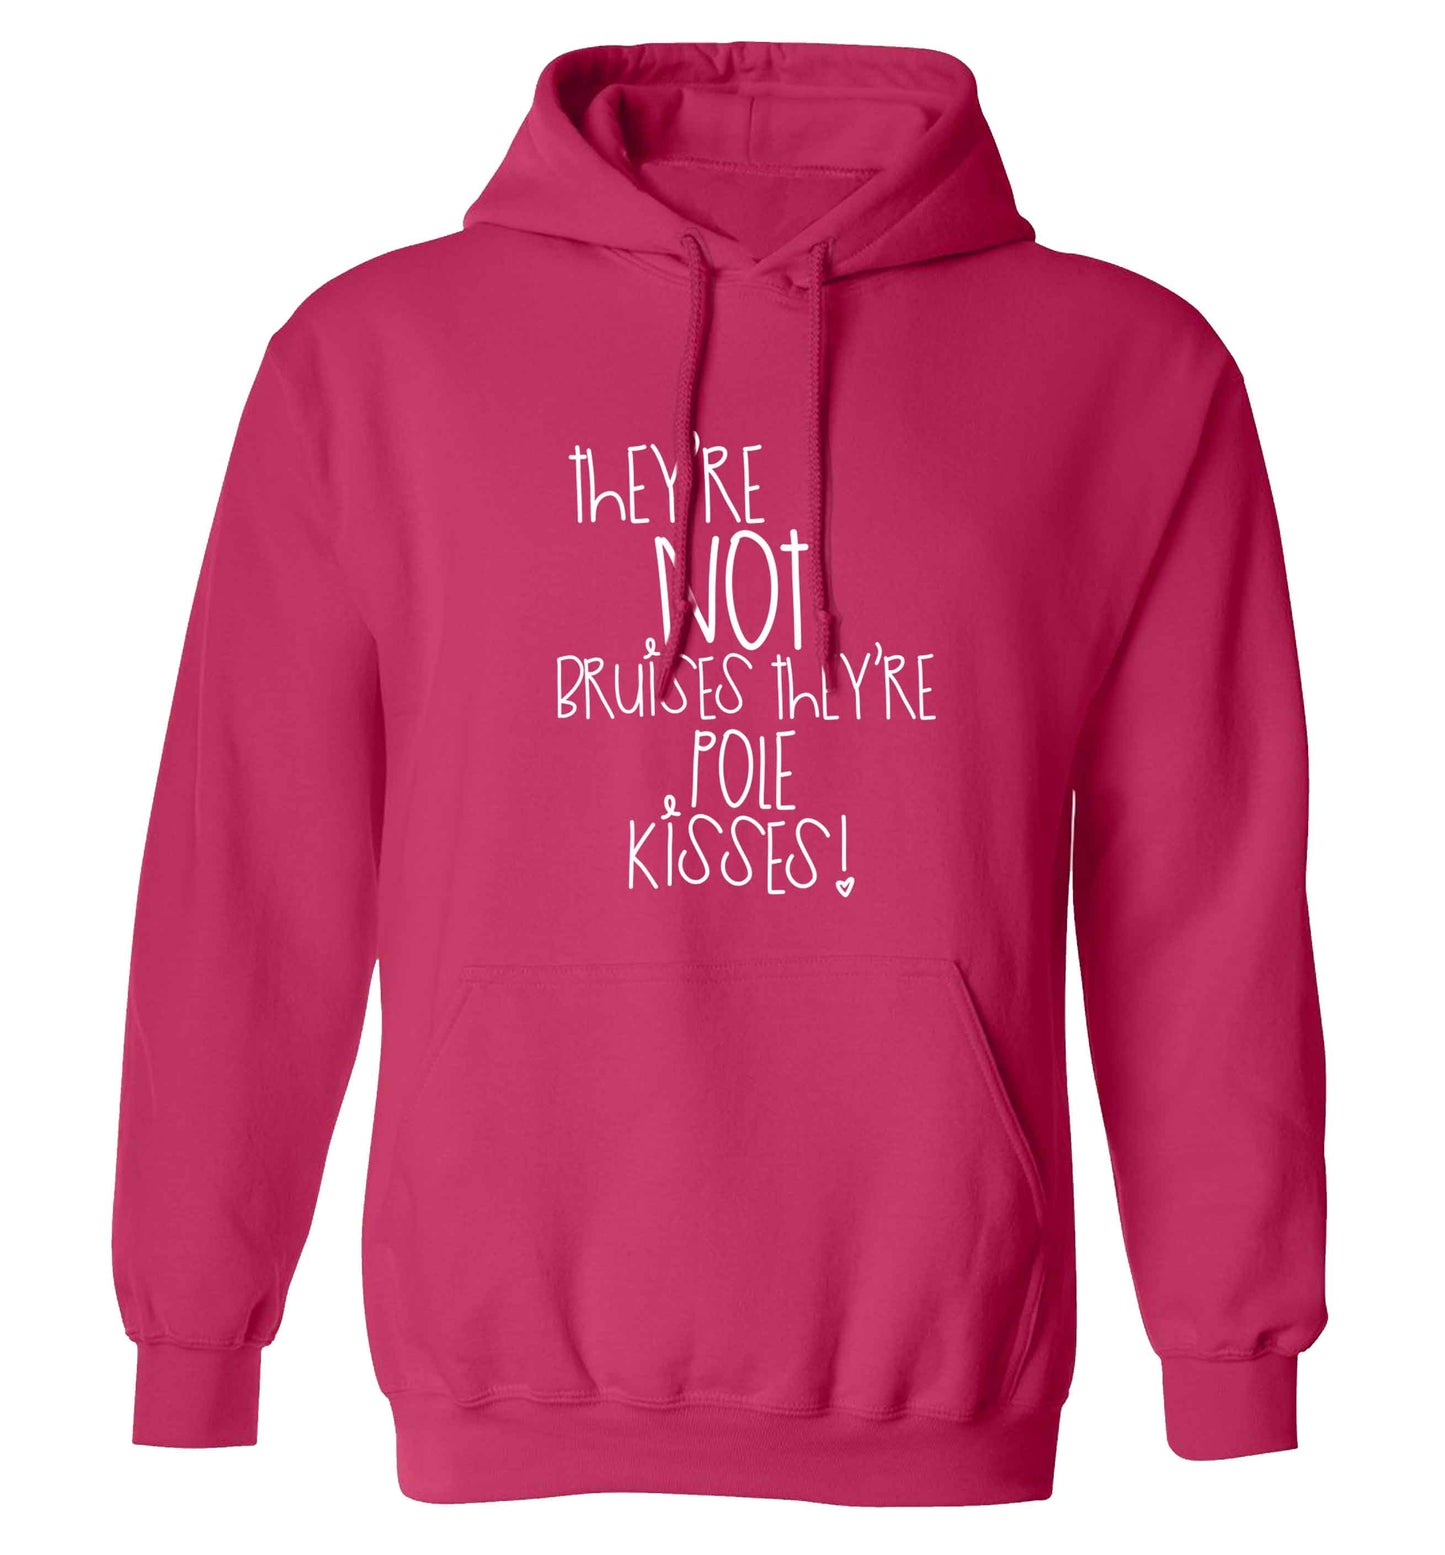 They're not bruises they're pole kisses adults unisex pink hoodie 2XL